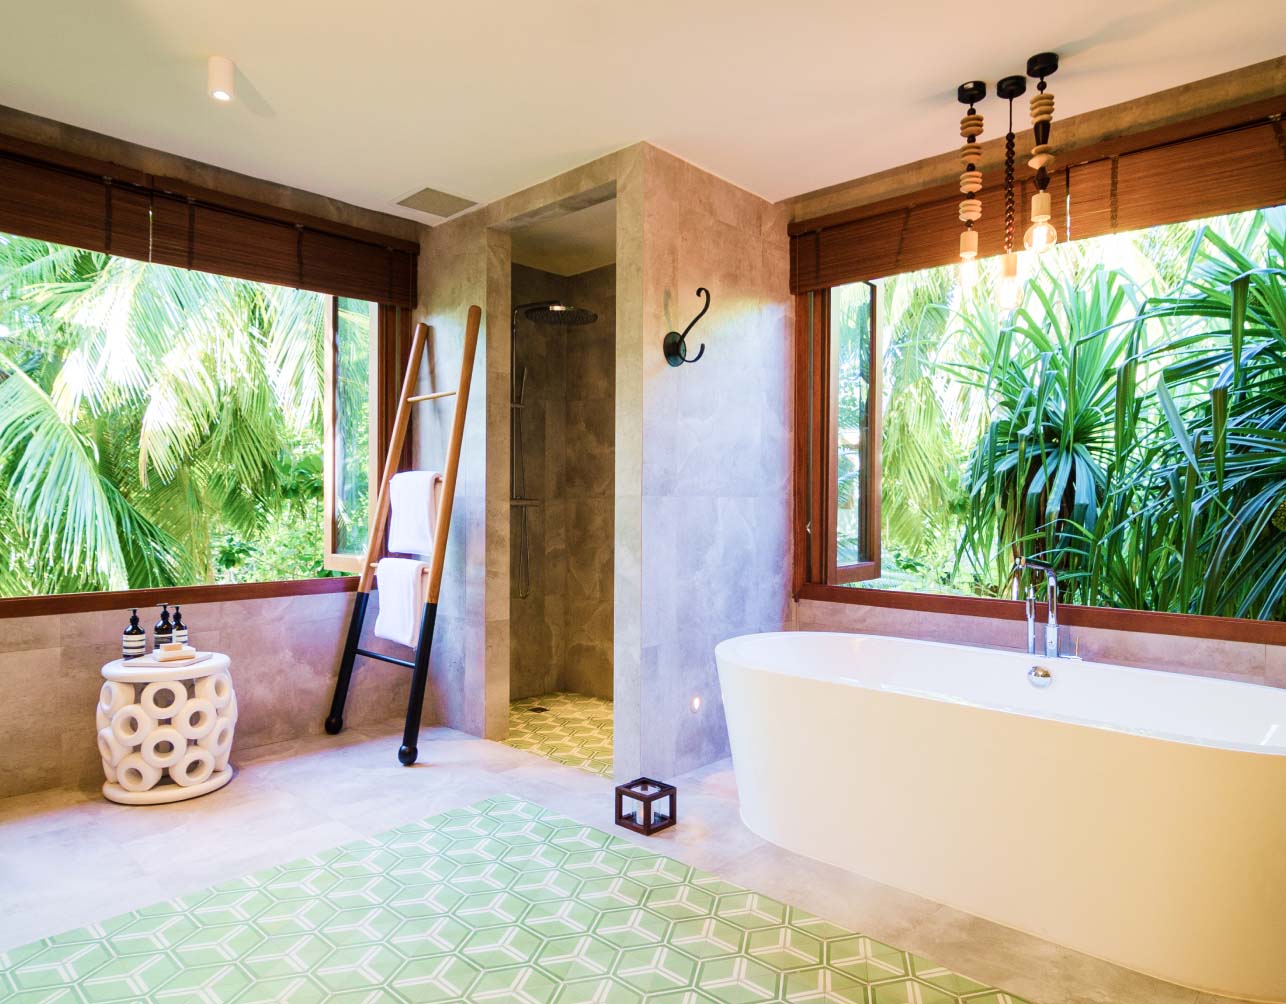 The spacious soaking tub for 2 and rain shower inside our Maldives Treetop Villas.